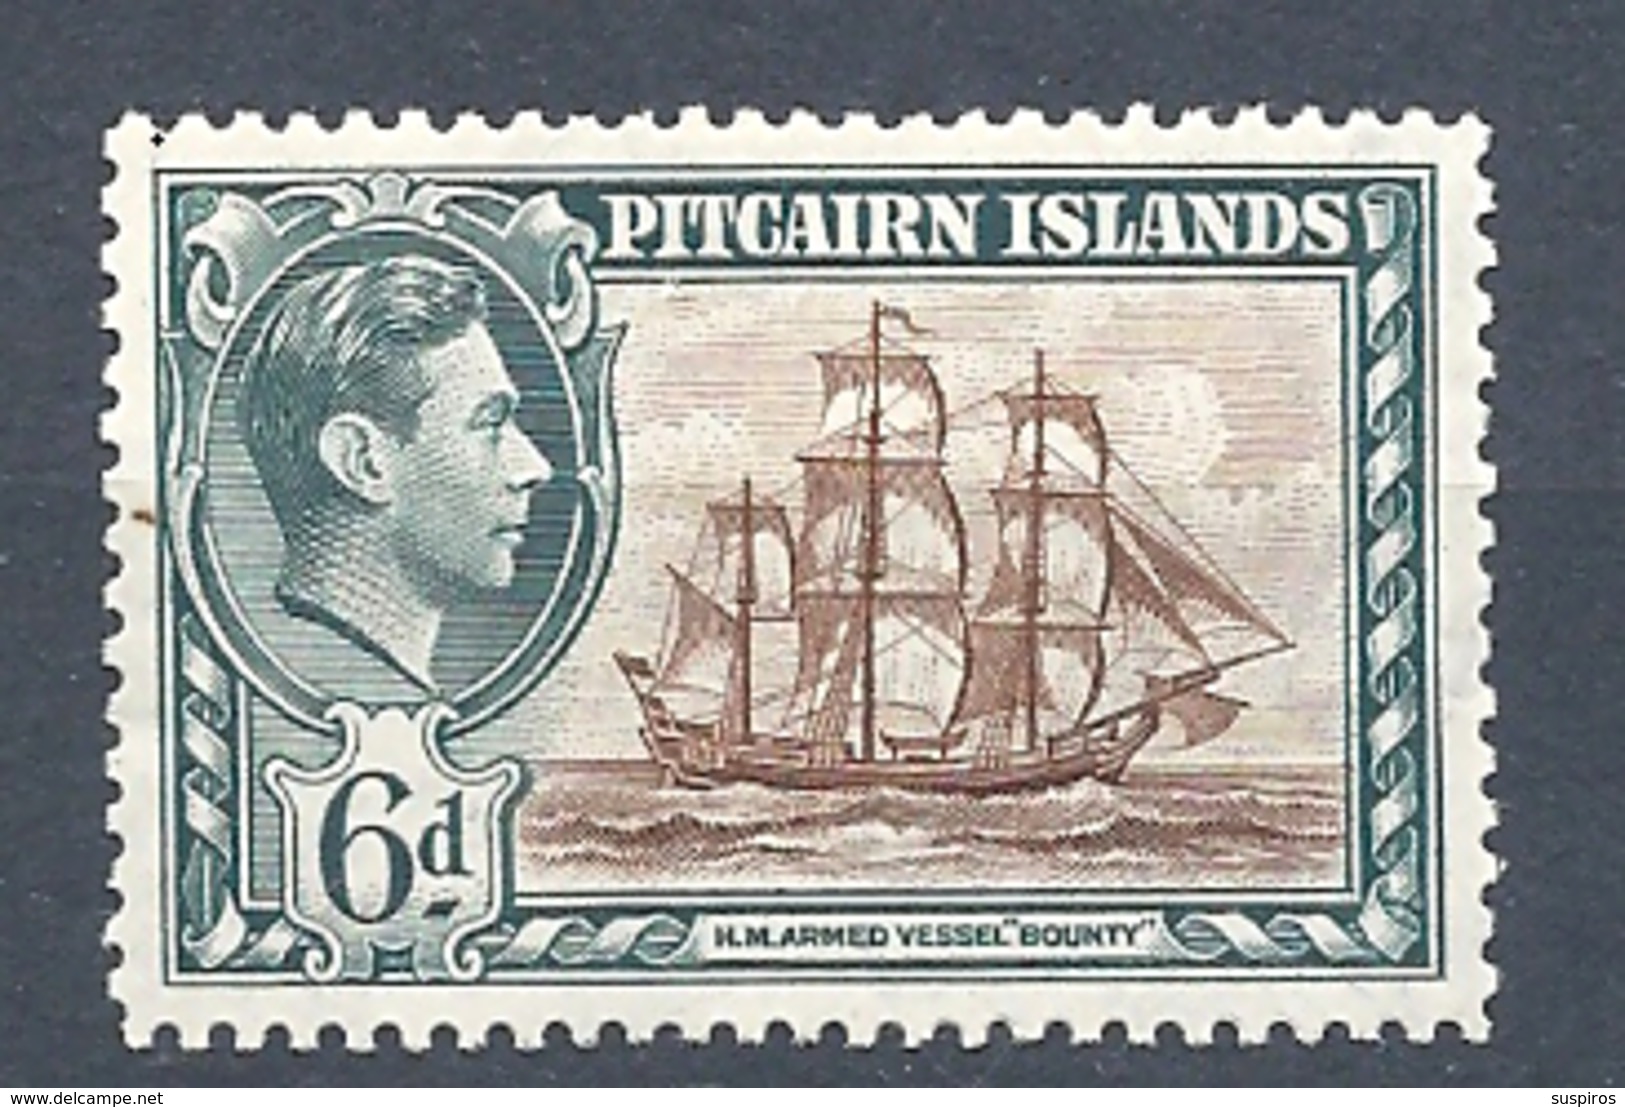 PITCAIRN ISLANDS    1940 King George VI, Scenes From The History Of Mutiny "Bounty"MNH H.M ARMED VESSELL BOUNTY - Pitcairn